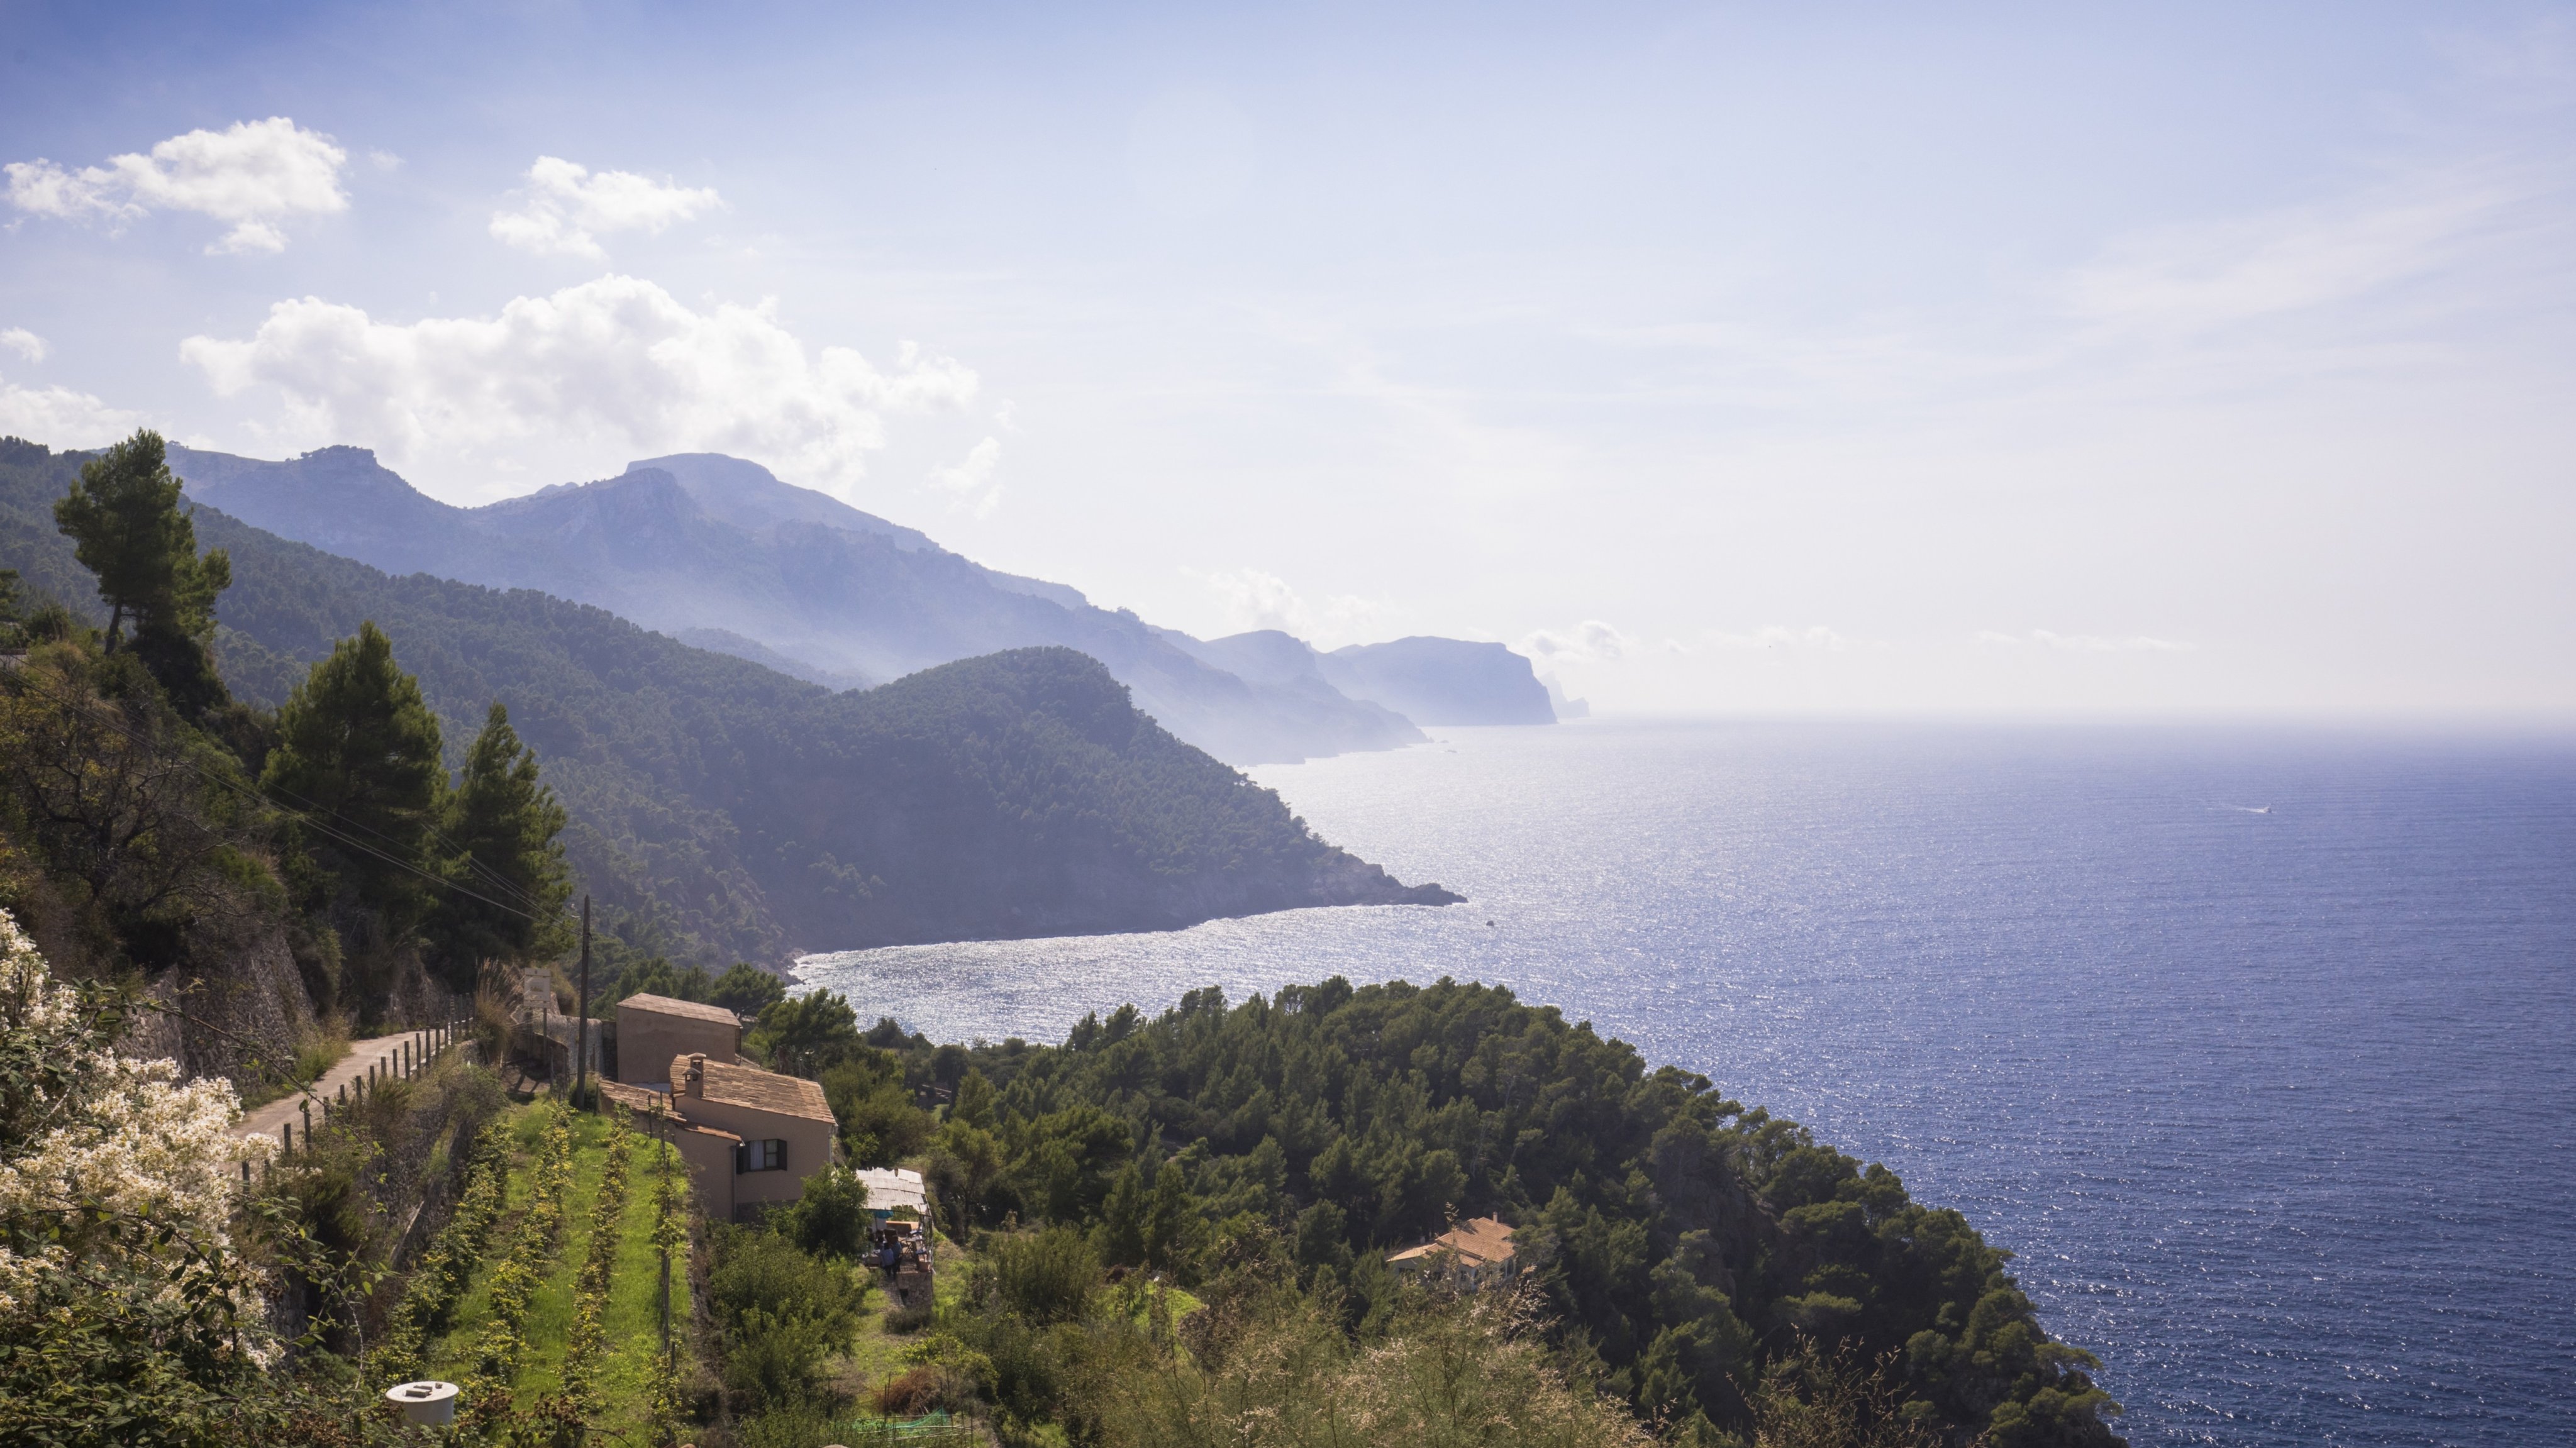 View over the northern coastline of Mallorca with a vineyard in the foreground.